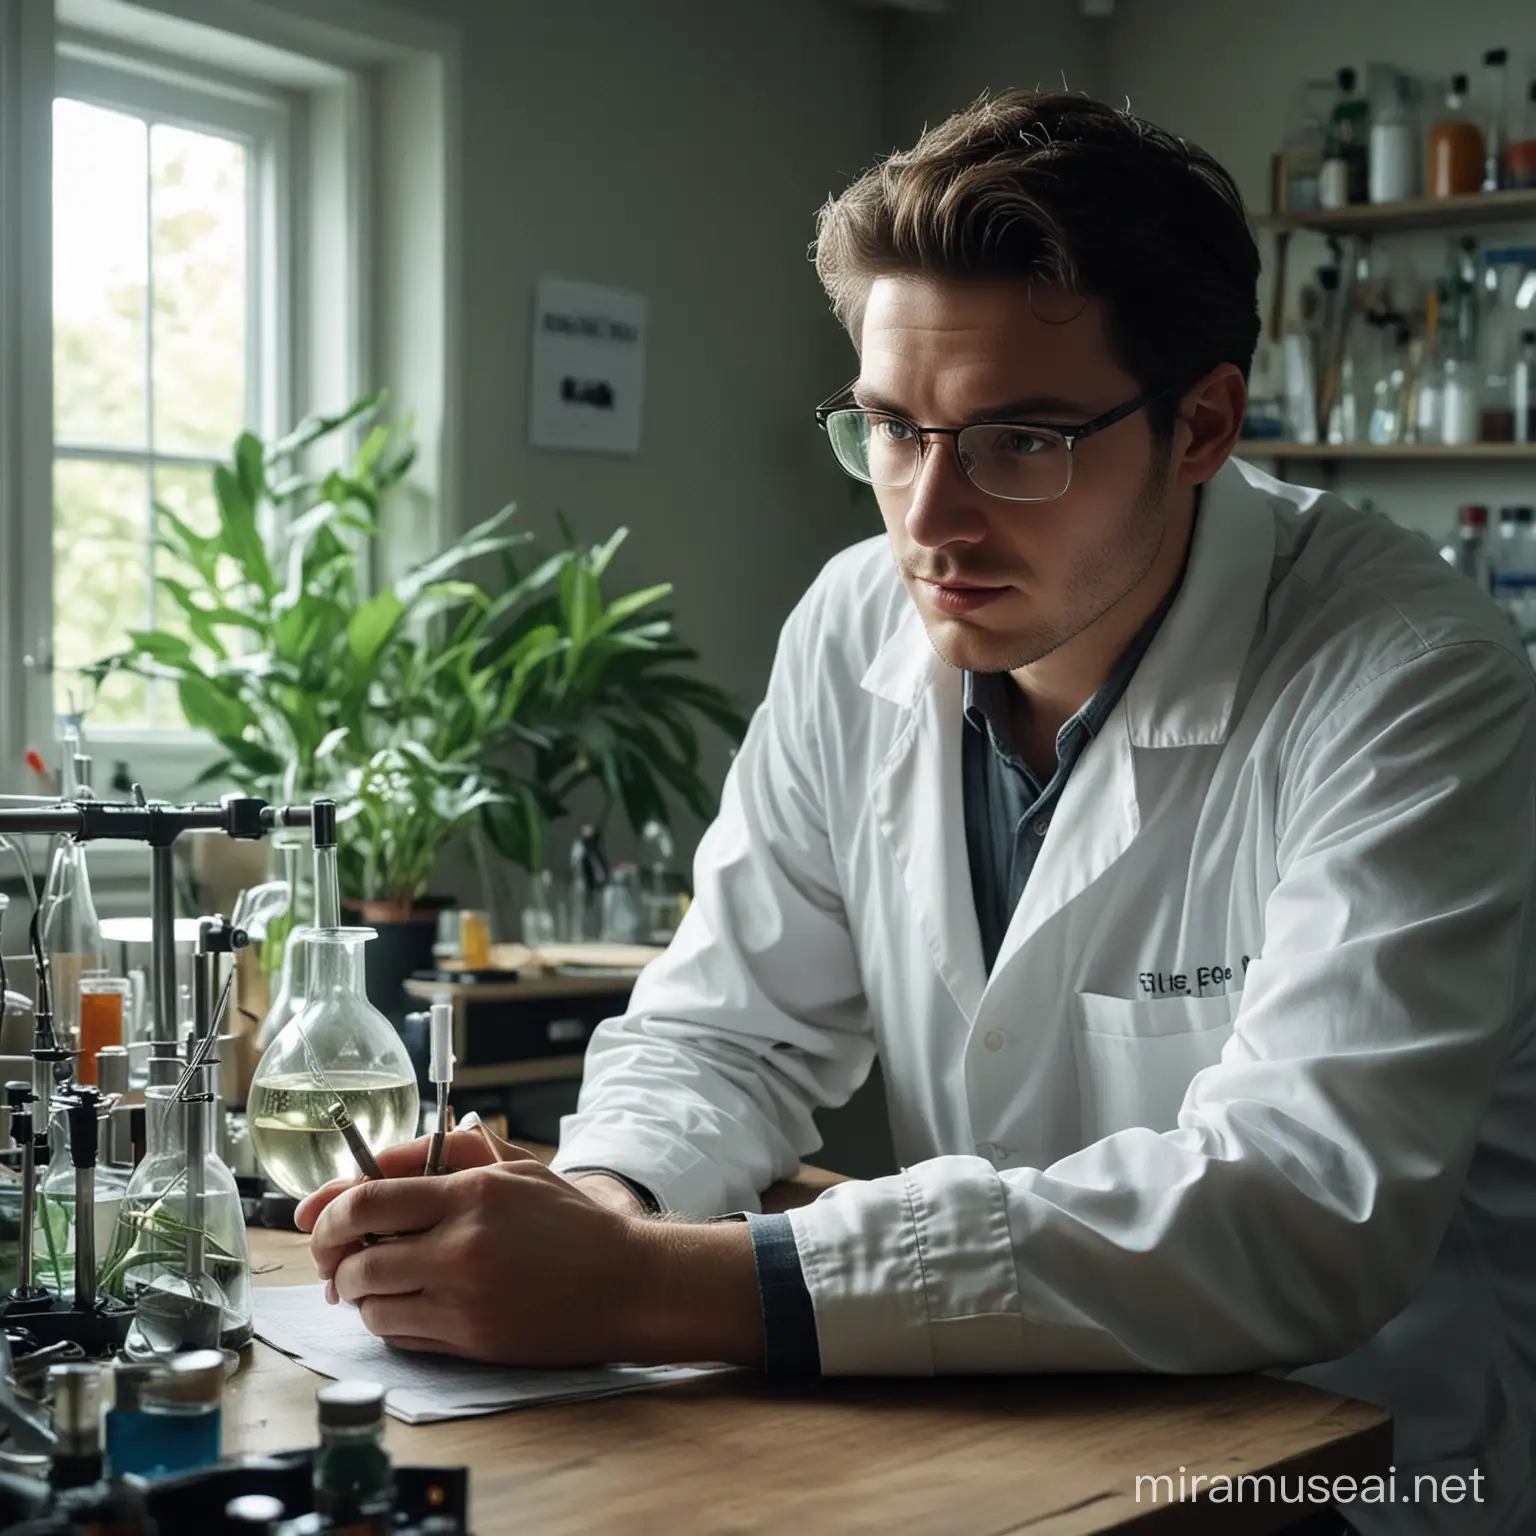 Create an image featuring a young male biologist facing setbacks and failures in his experiments. Show him in his laboratory, surrounded by equipment and data, visibly frustrated by unsuccessful results. Despite the challenges, depict him maintaining a determined expression, reflecting resilience and a refusal to give up. Showcase moments of introspection and adaptation as he learns from his mistakes and adjusts his approach. The scene should convey the resilience of the biologist in the face of adversity, highlighting his unwavering commitment to scientific exploration and discovery. Luminous environnement. make it like he just got an idea and he's optimistic in front of his failure

